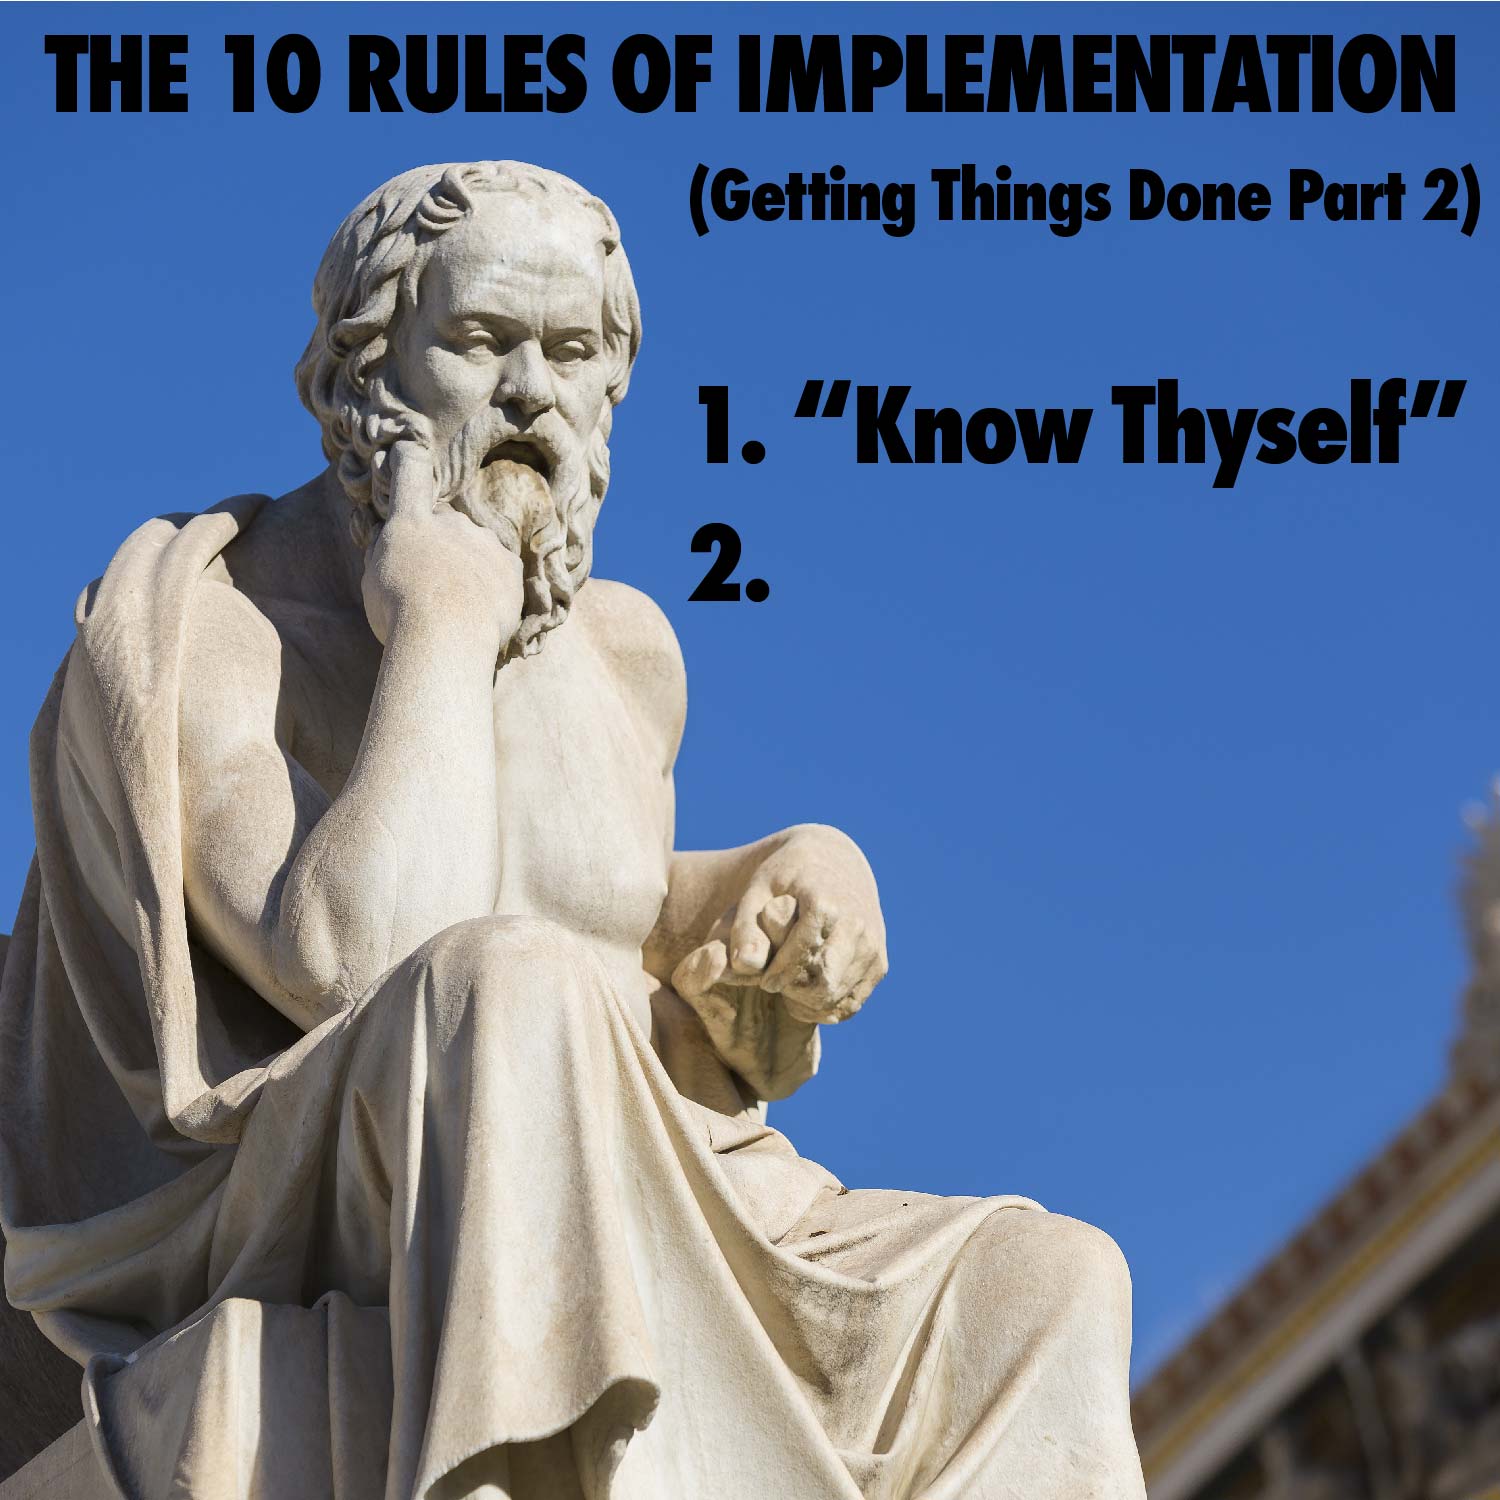 Image of Socrates. Title: "THE 10 RULES OF IMPLEMENTATION (Getting Things Done, 2 Part 2)"